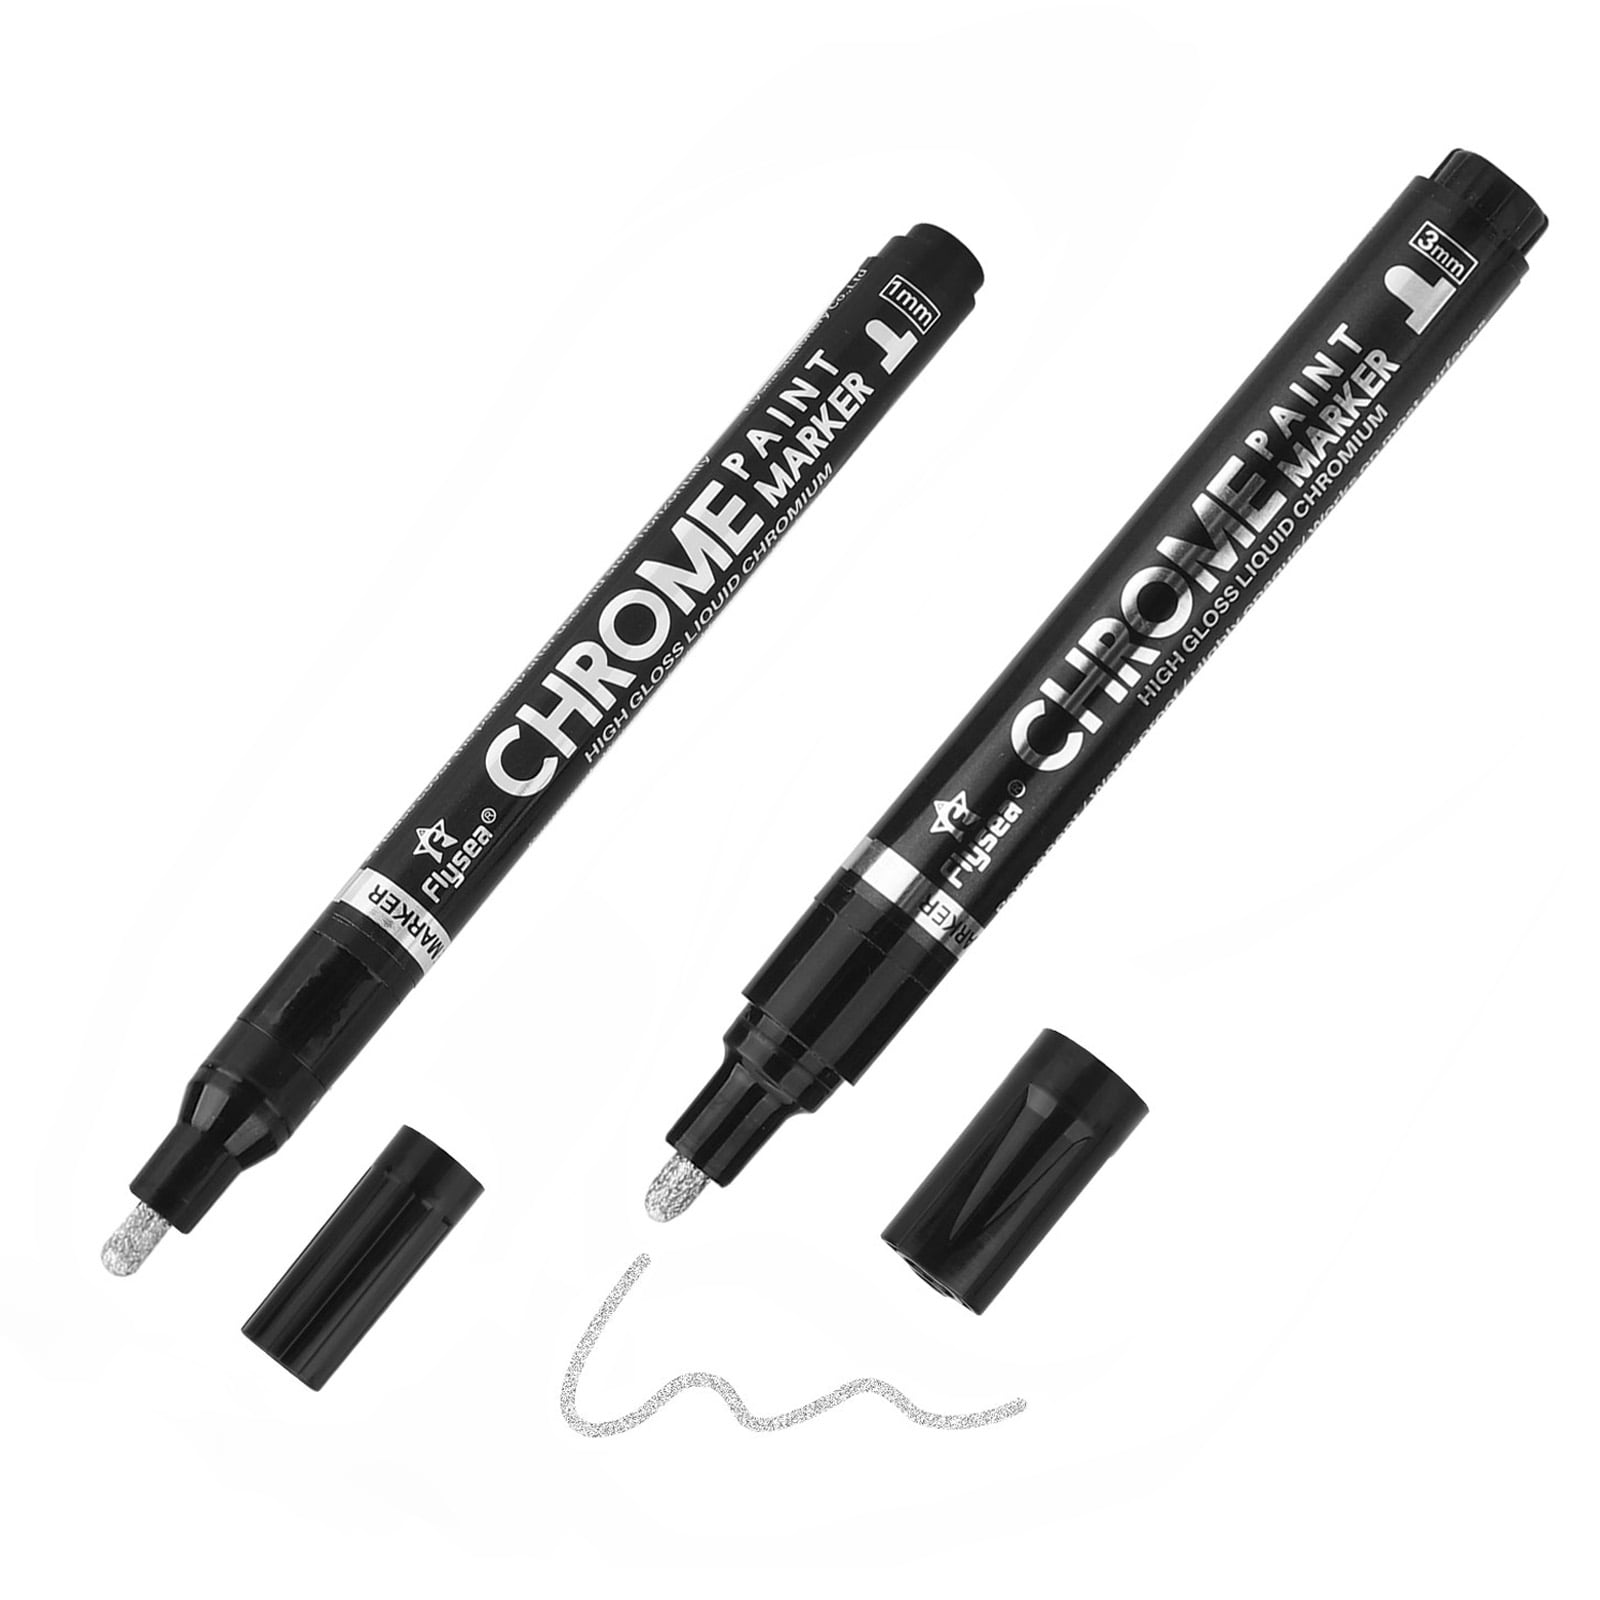 Inline Tube - This Inline Tube chrome paint pen is one of